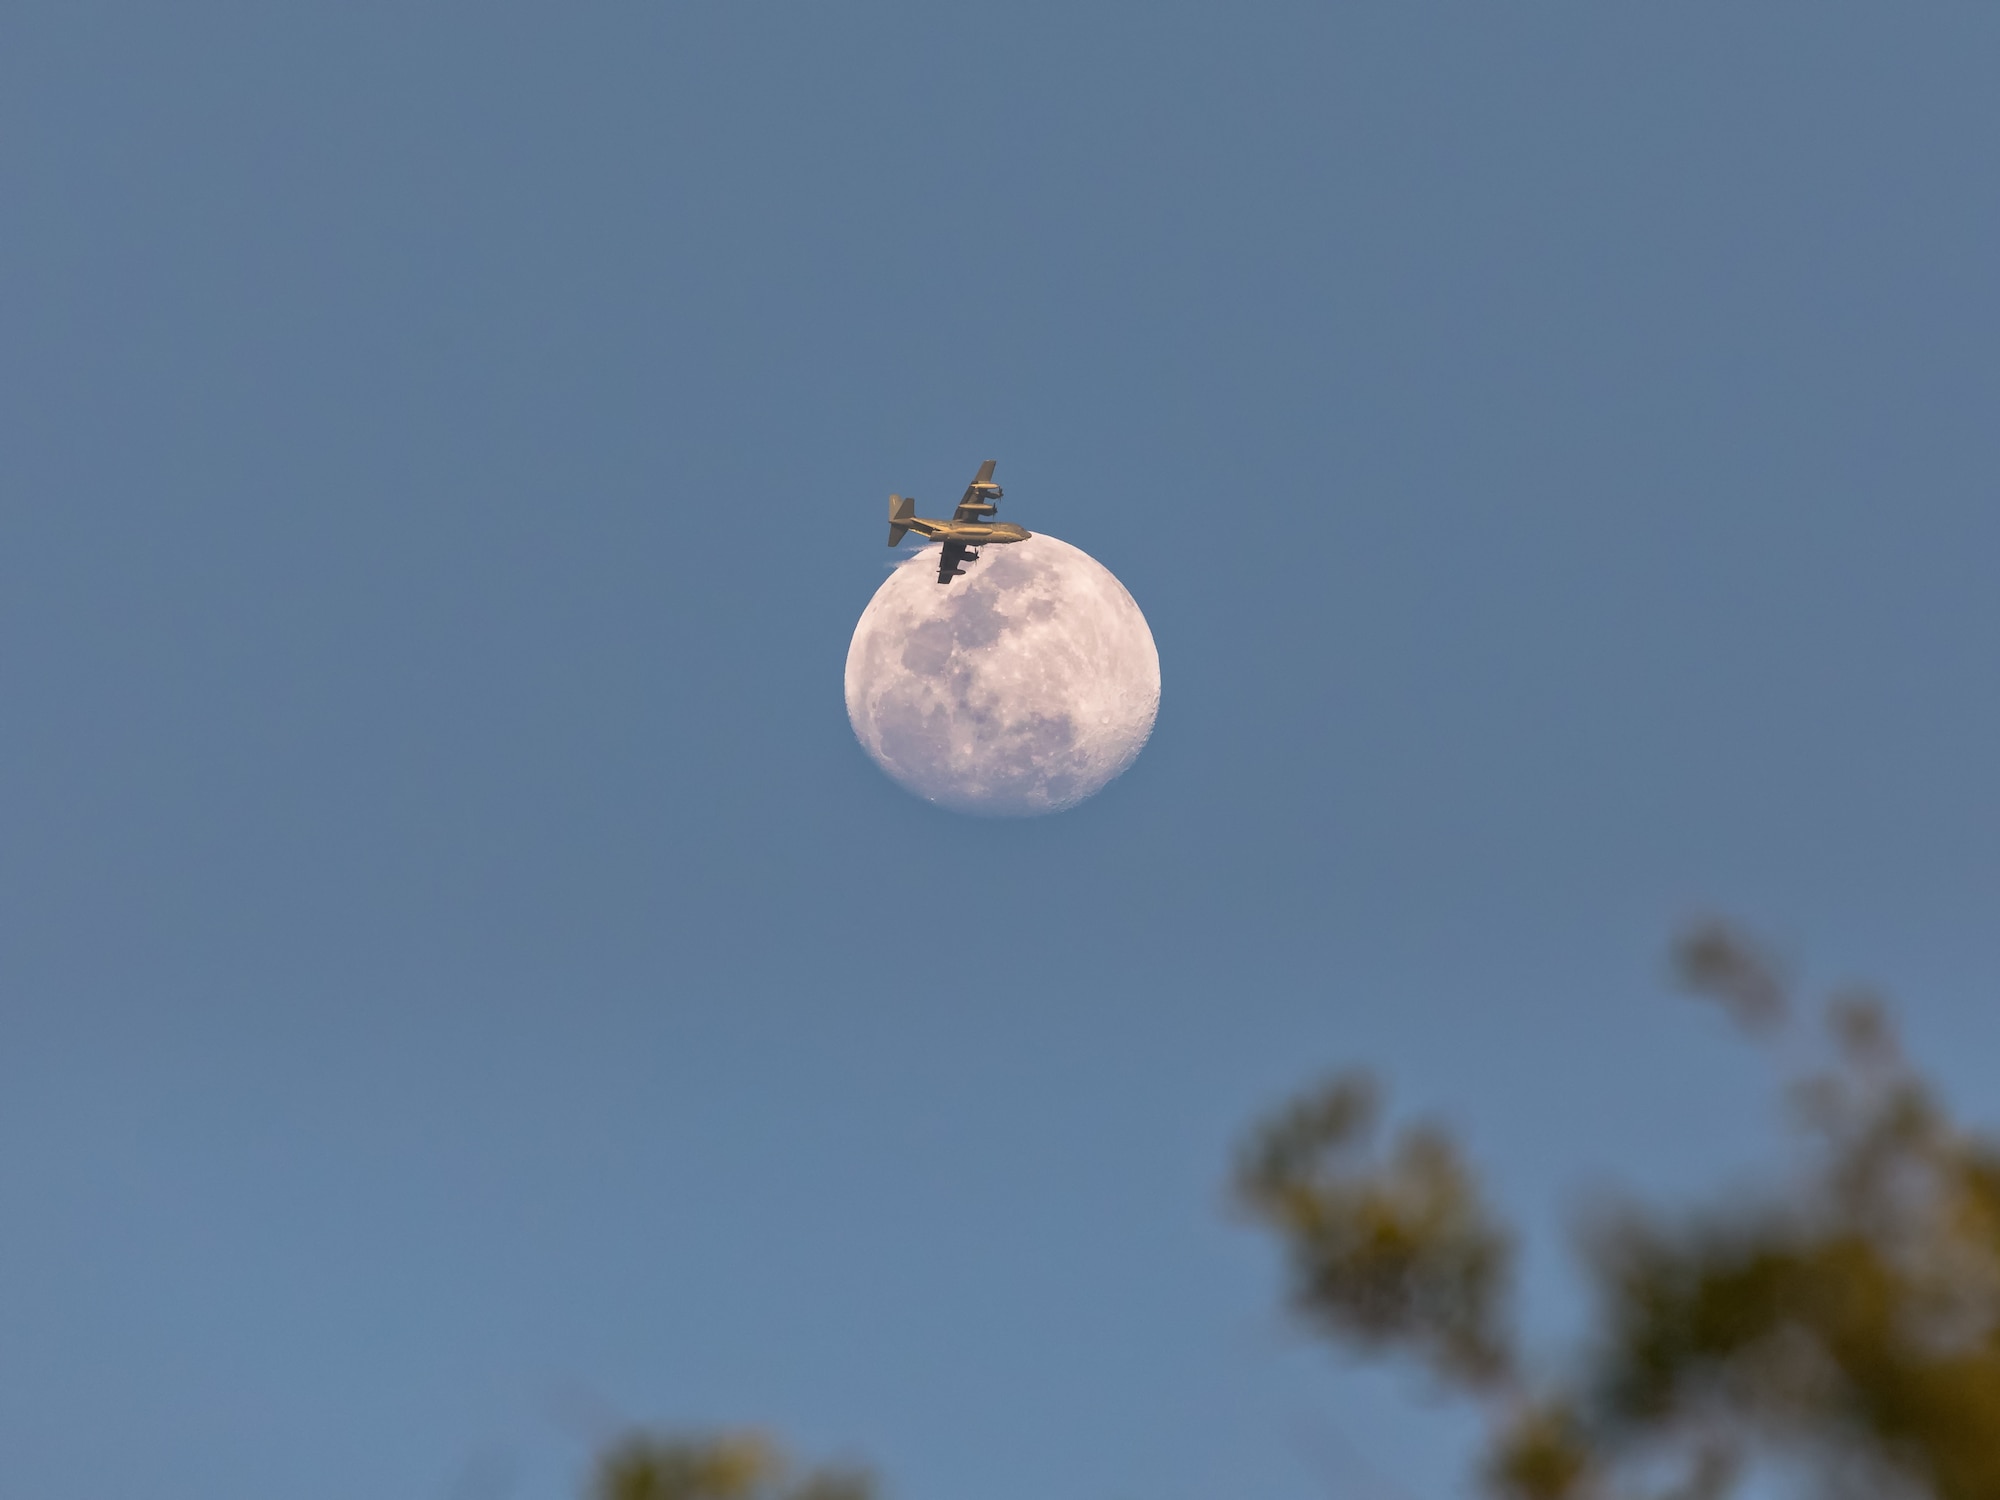 Melbourne, Florida photographer Michael Seeley spends a ton of time looking at the moon, but says it's the first time he happened to catch an airplane-lunar transit early in April 2018. After capturing the shot, he got in touch with the 920th Rescue Wing public affairs office to share the photo. Upon close inspection you can see the loading ramp was open while the Reserve Citizen Airmen piloting the HC-130N on a local training mission crossed the moon. (Photo courtesy Michael Seeley)